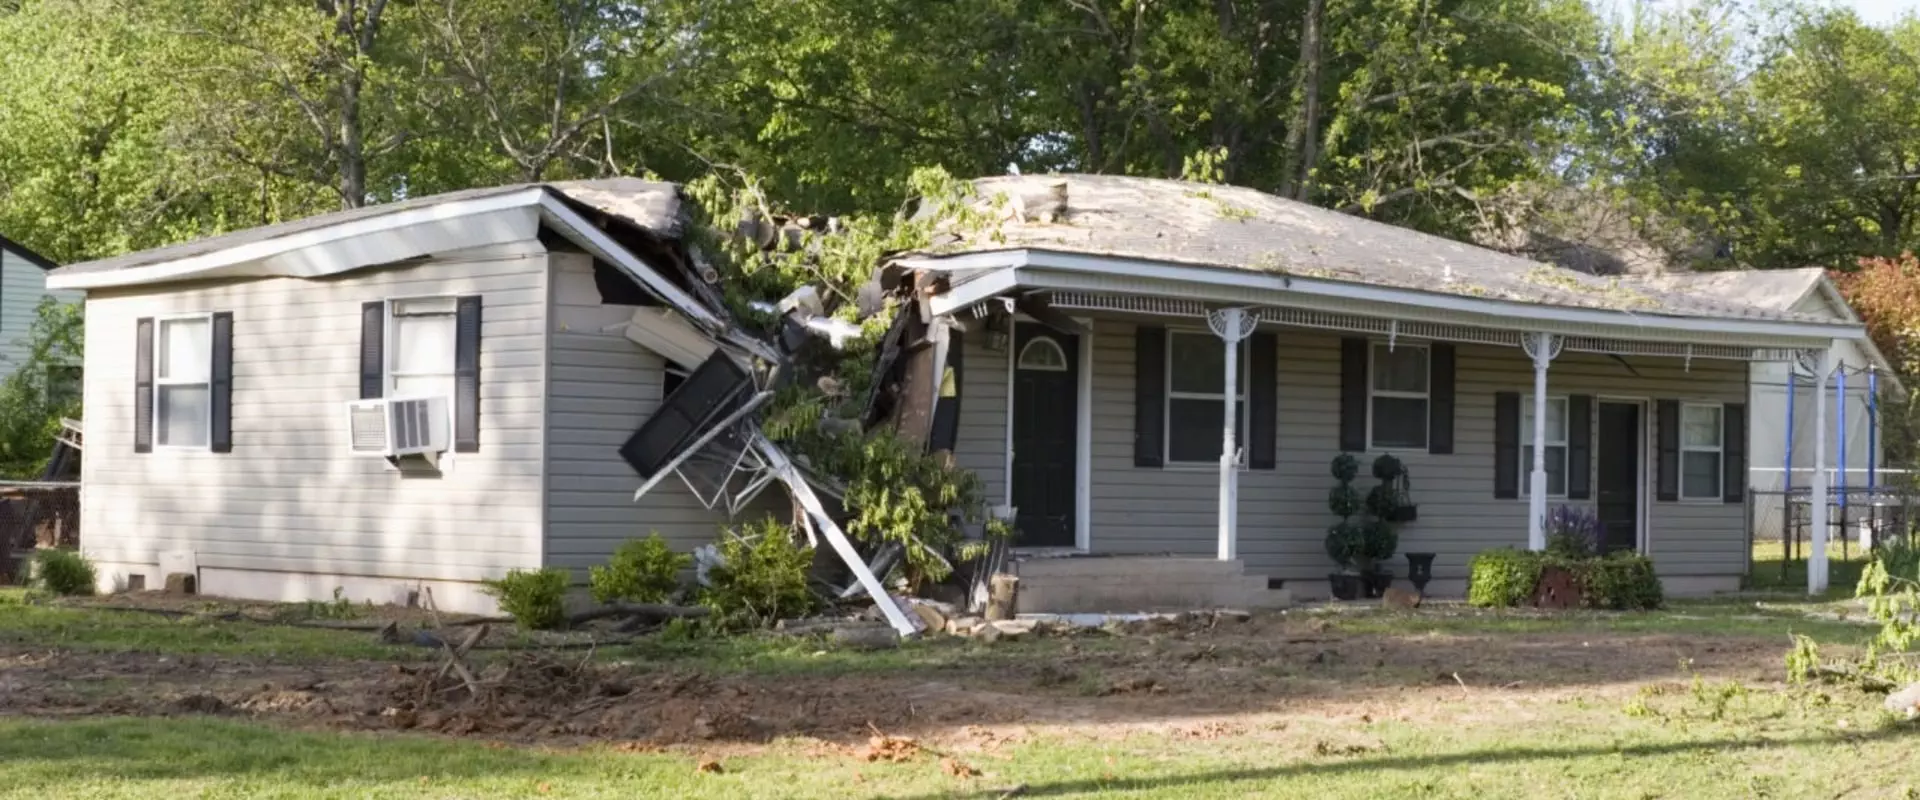 What are the 4 catastrophes covered by renter’s insurance?